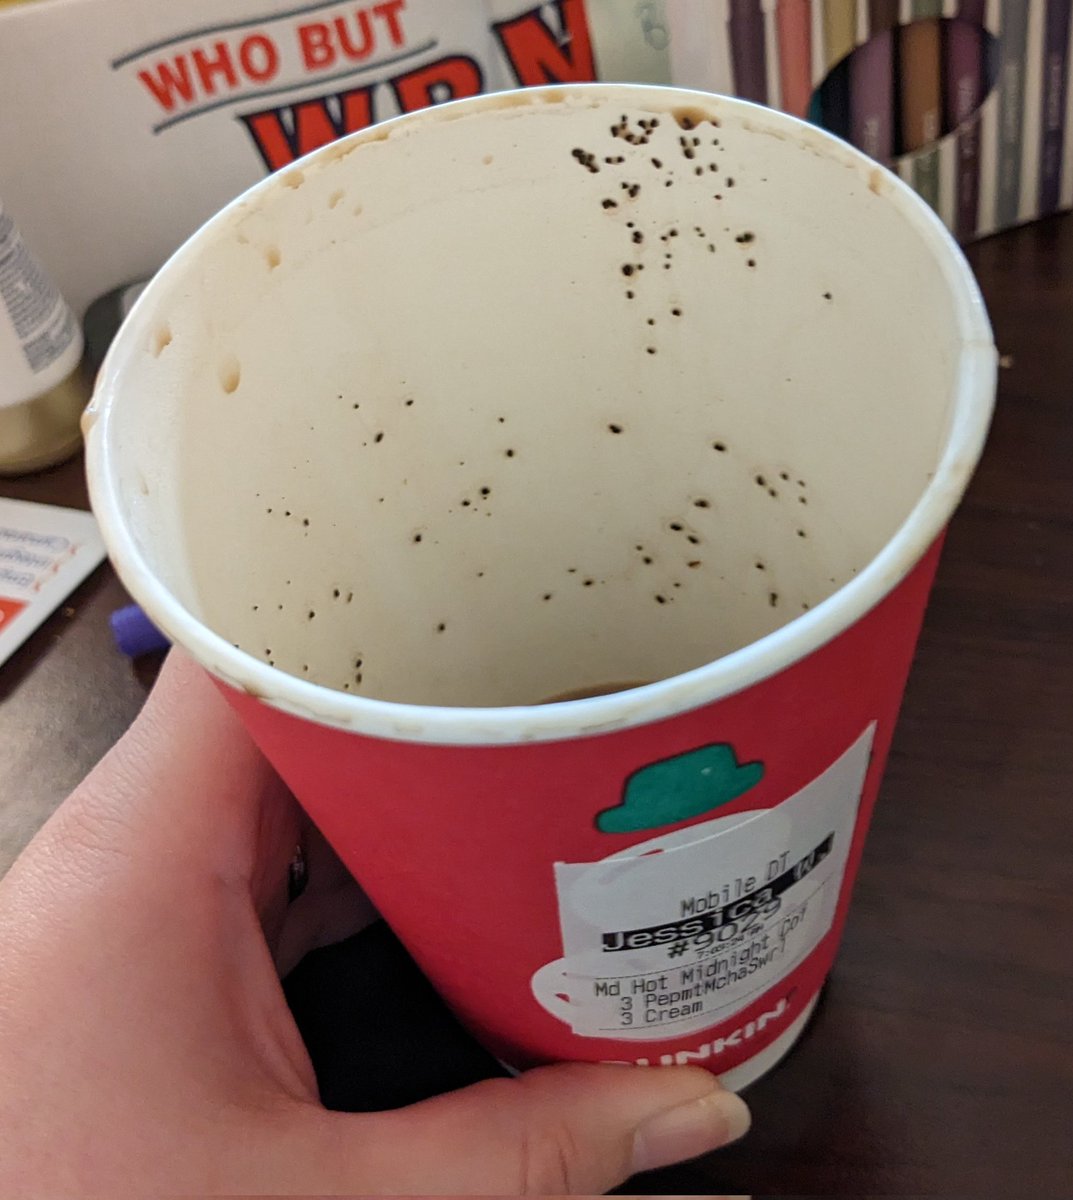 Nothing like a swig of grounds to start your morning off on the right foot 🤢🤮 #dunkin #coffee #grounds #thebestpartofwakingup